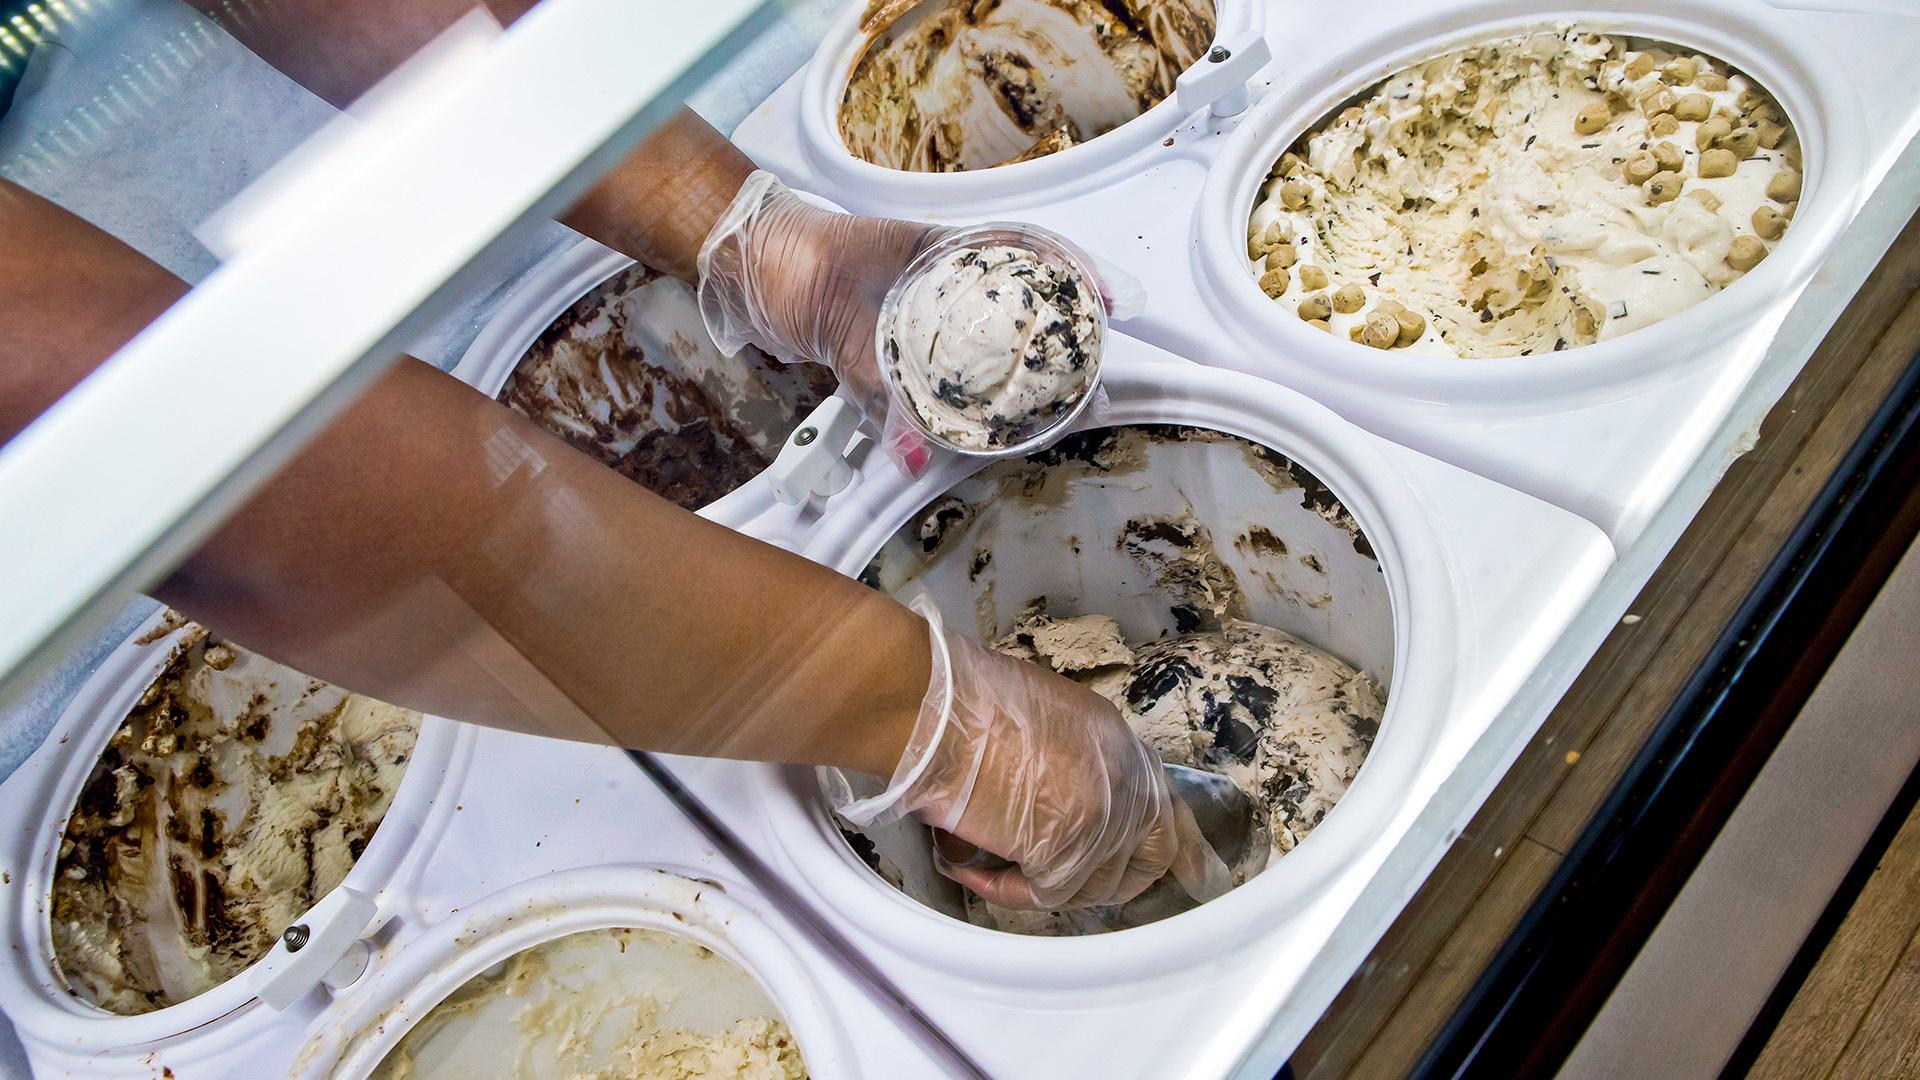 Staff dishes out a scoop of ice cream at the Maryland Dairy.